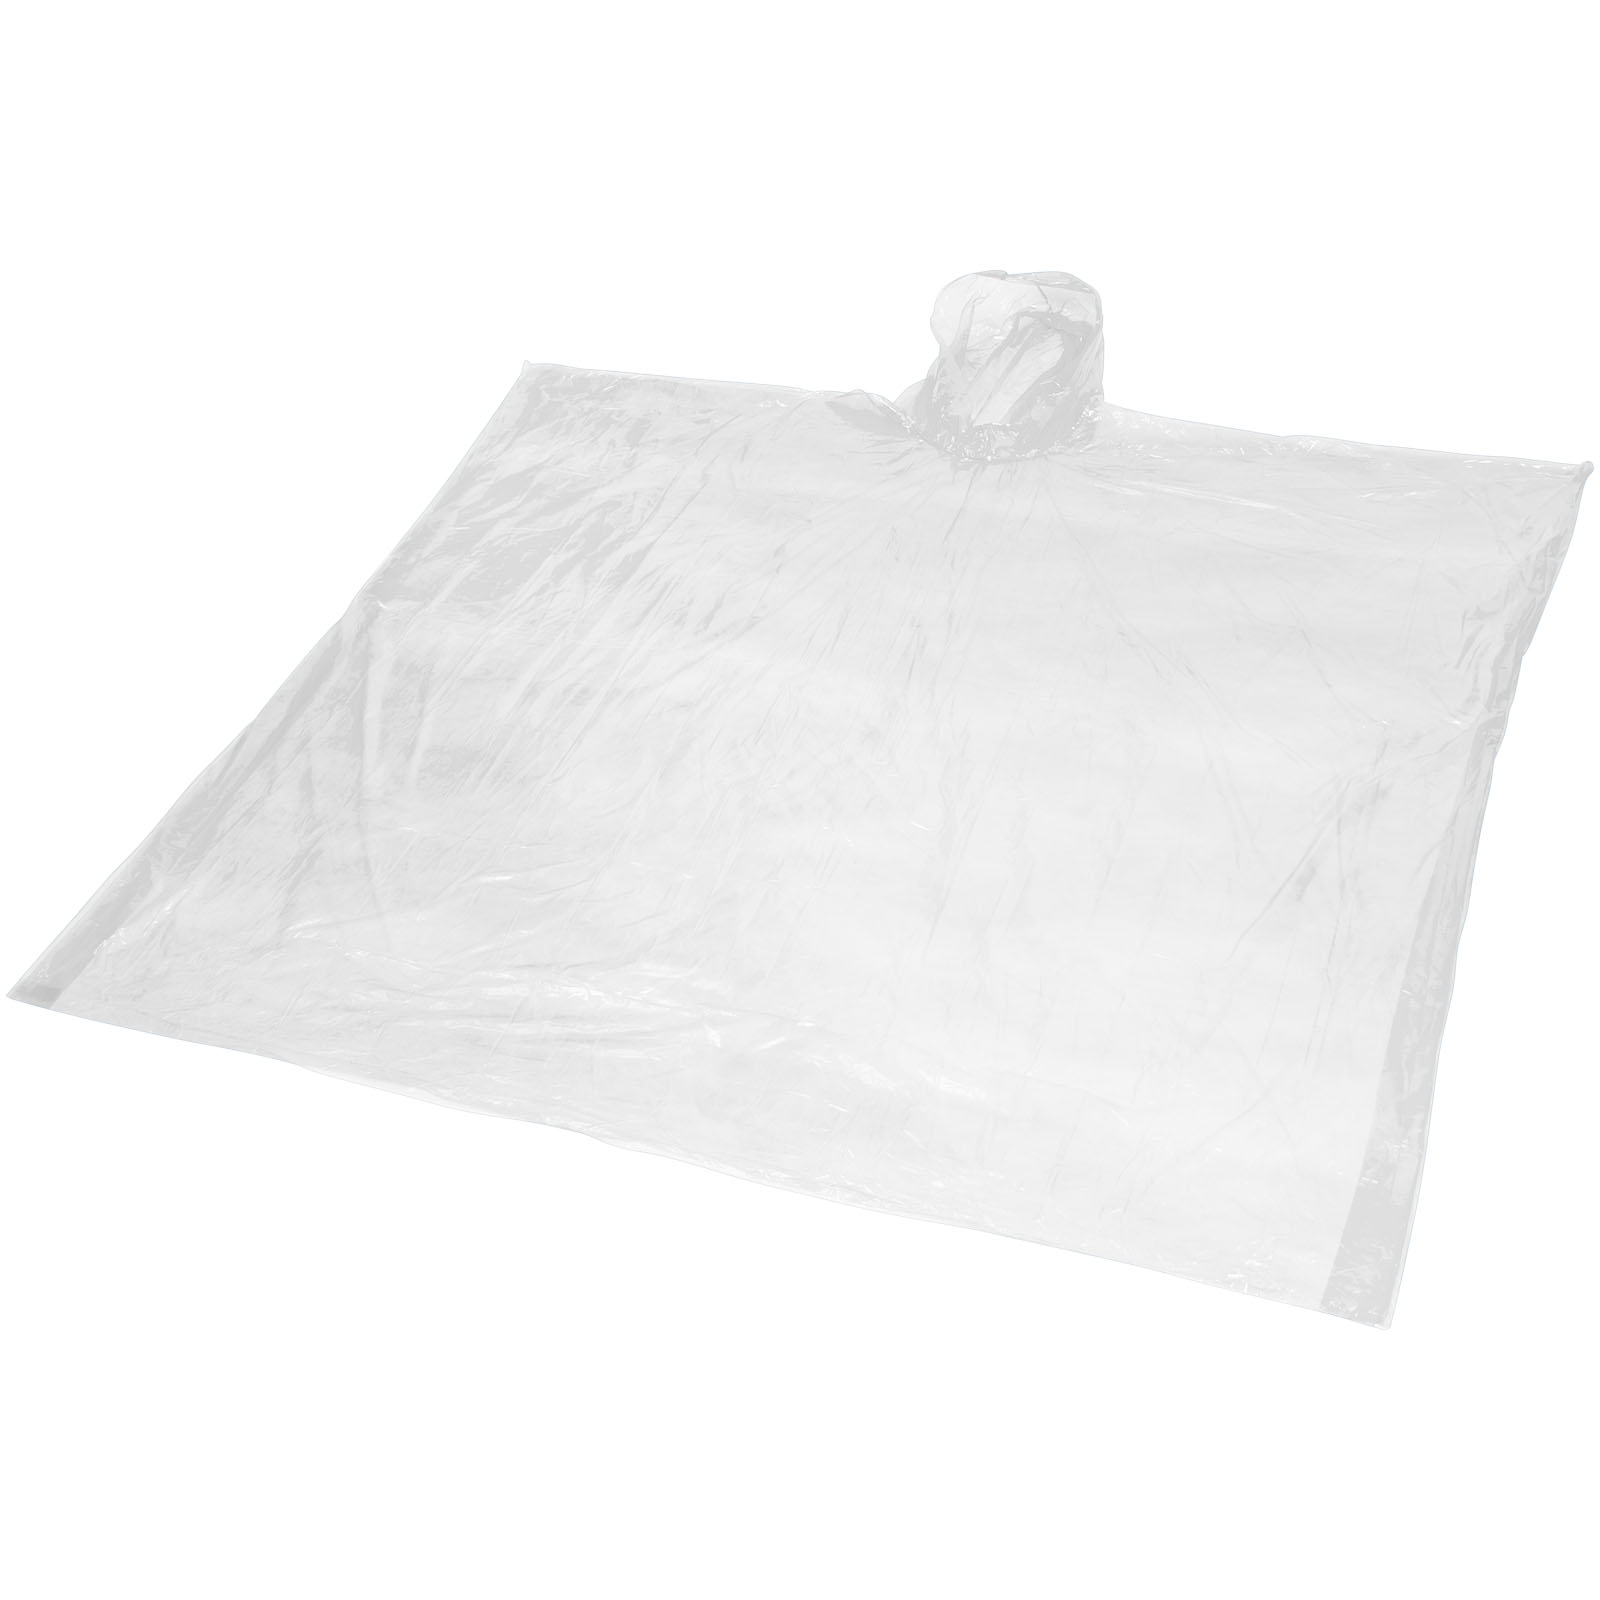 Rain Ponchos - Mayan recycled plastic disposable rain poncho with storage pouch